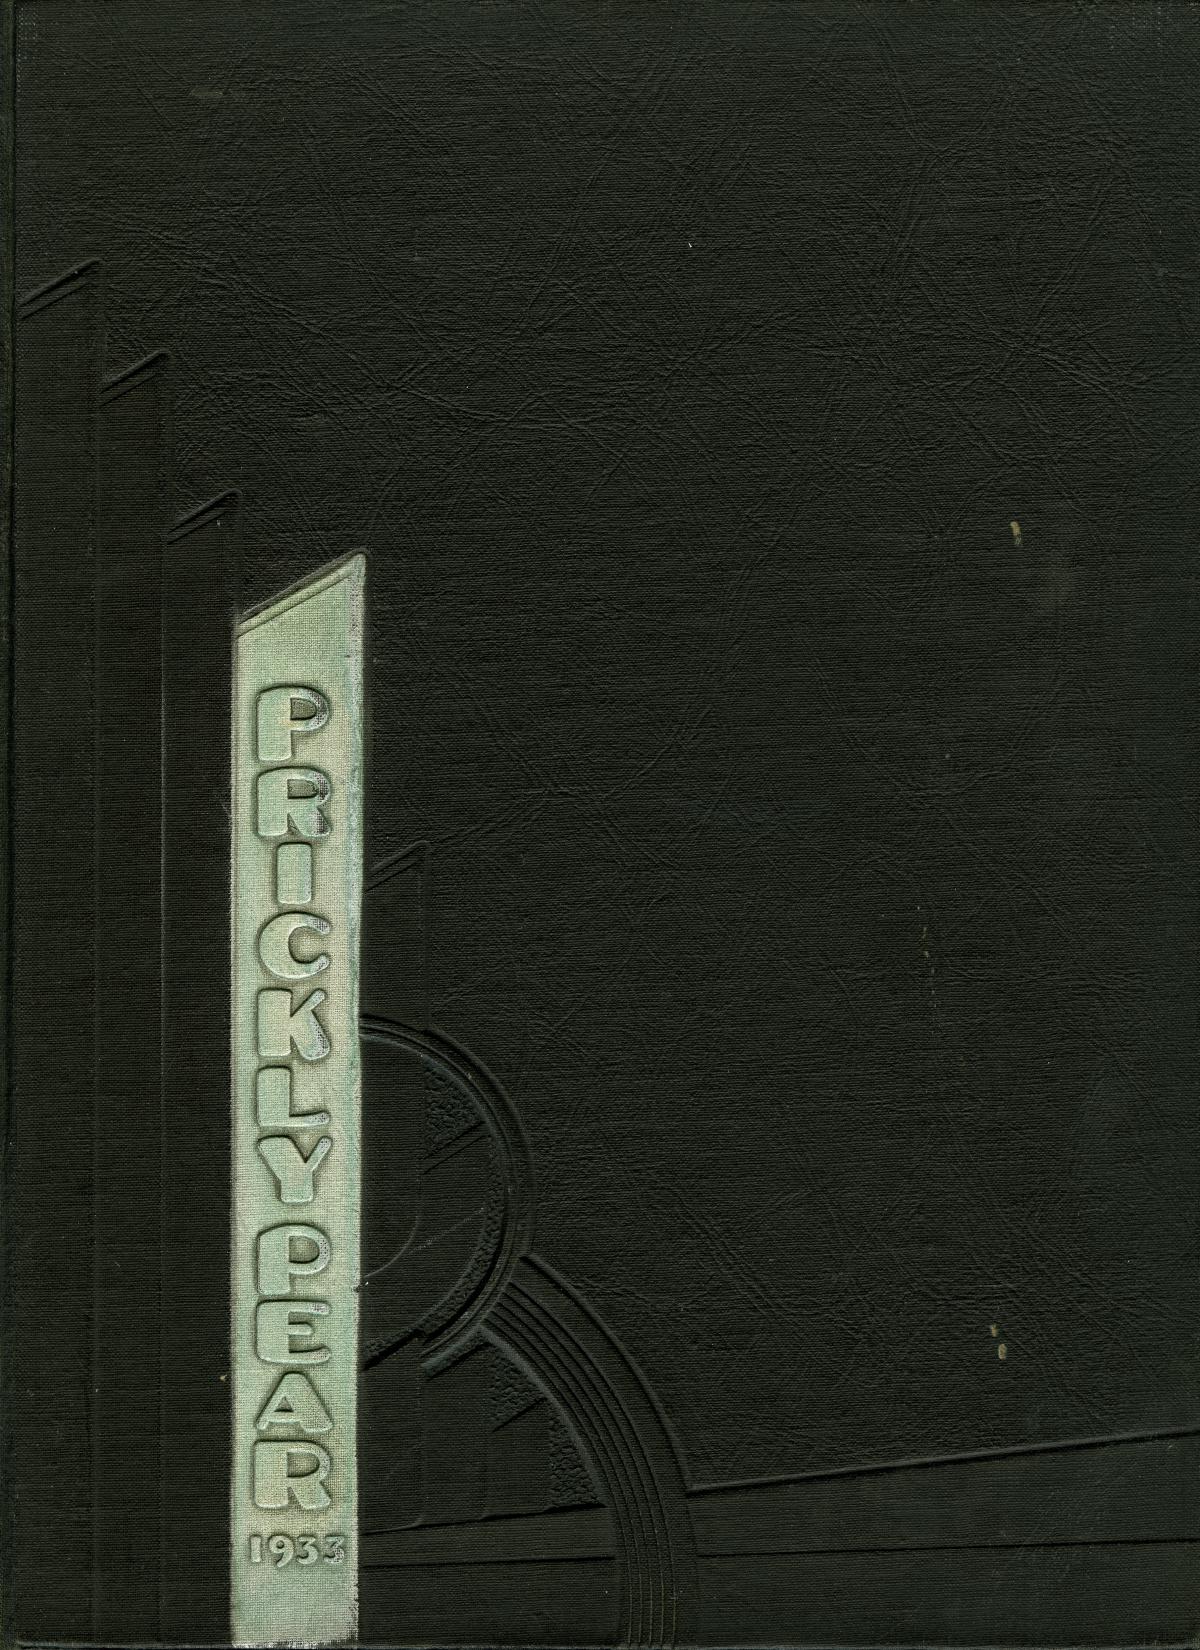 Prickly Pear, Yearbook of Abilene Christian College, 1933
                                                
                                                    Front Cover
                                                